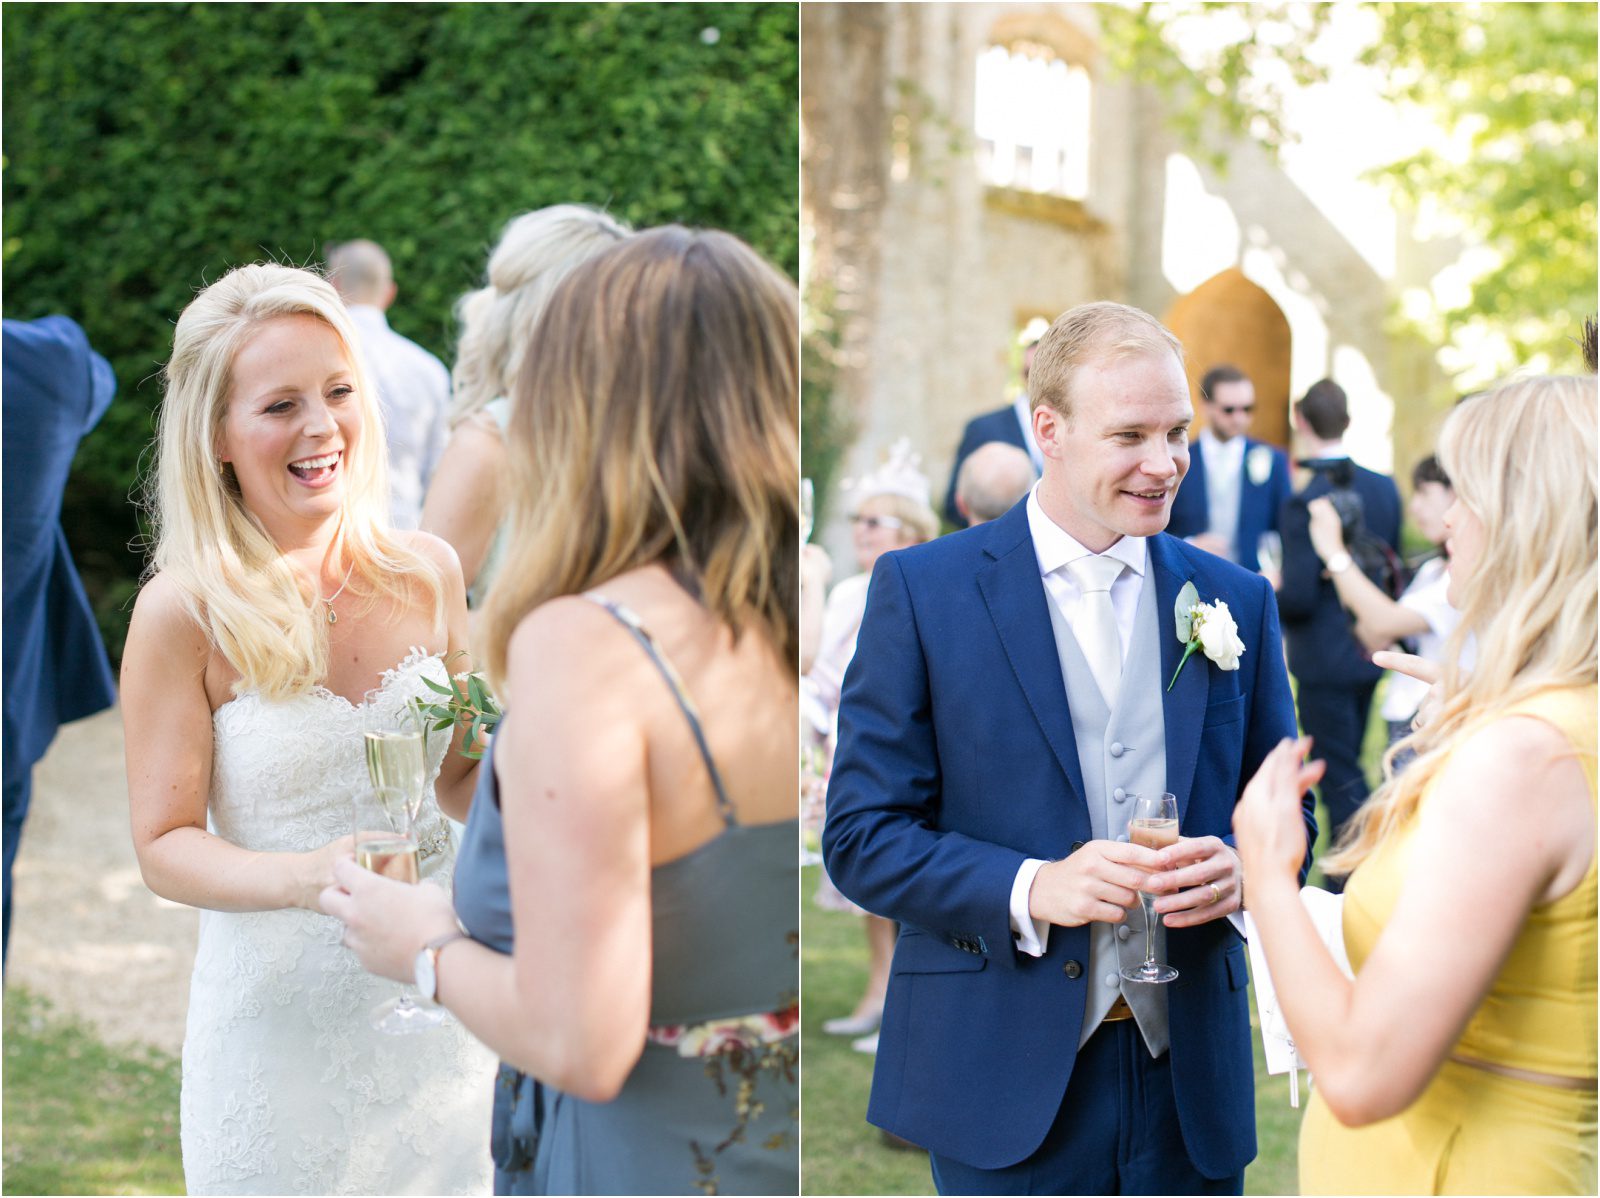 Wedding photography at Sudeley Castle & Gardens